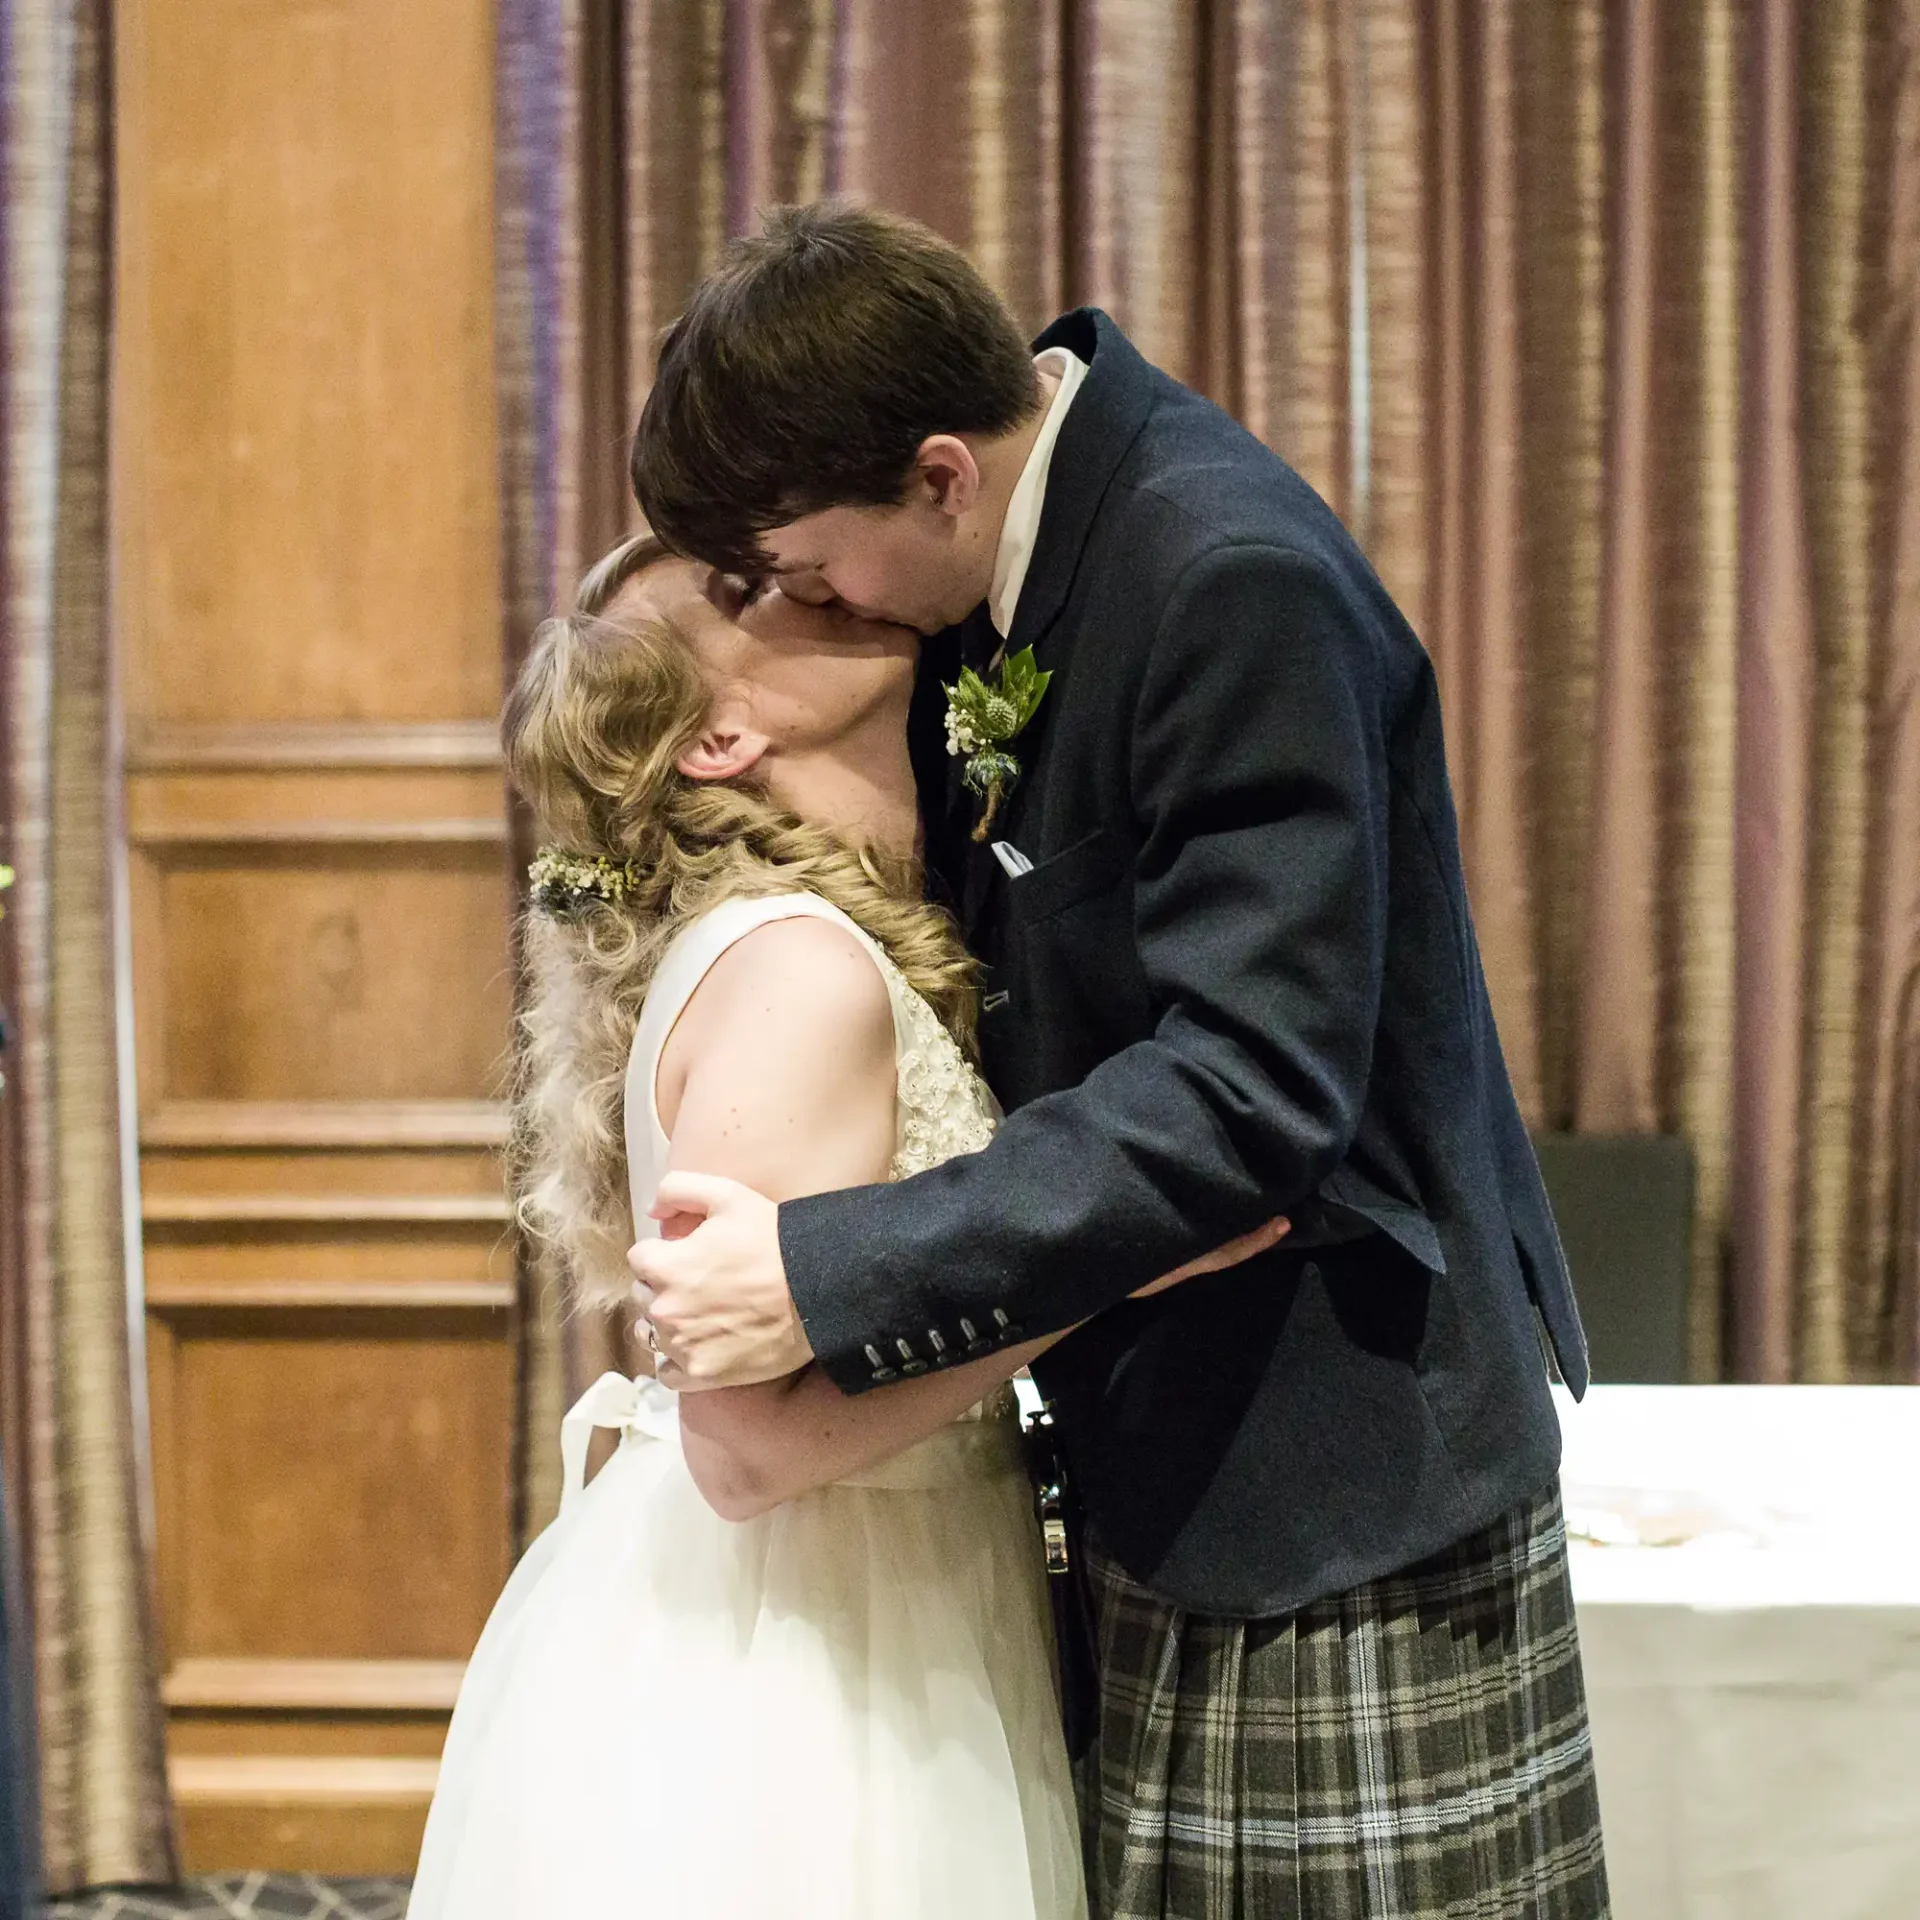 A bride and groom kissing passionately at their wedding reception, with the groom wearing a kilt and the bride in a white dress.